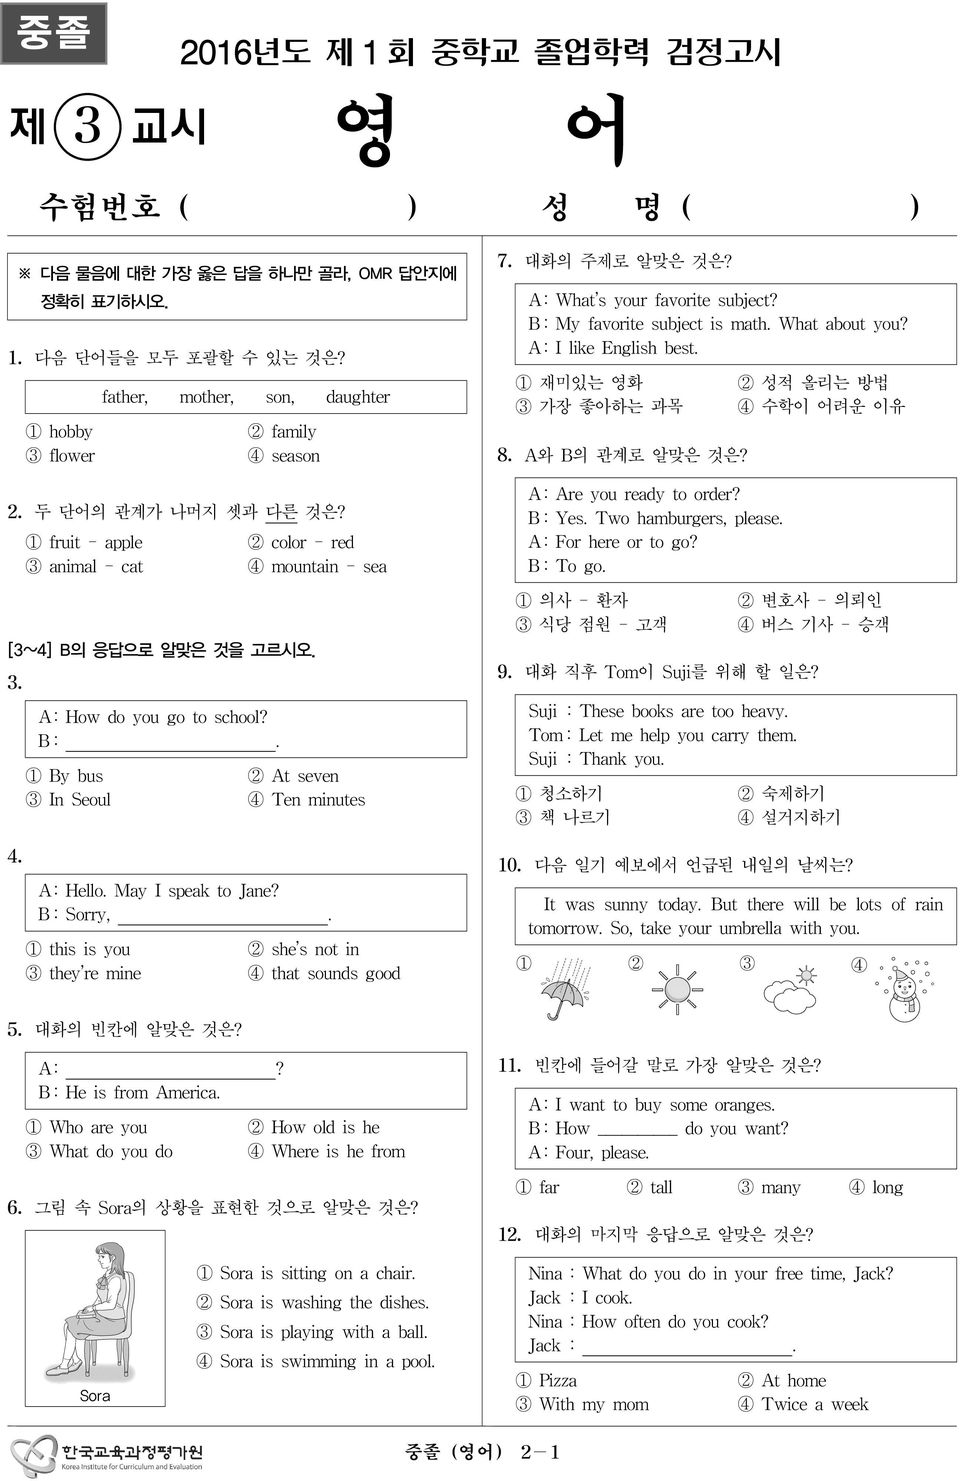 1 By bus 3 In Seoul 2 At seven 4 Ten minutes A: Hello. May I speak to Jane? B: Sorry,. 1 this is you 3 they re mine 2 she s not in 4 that sounds good 7. 대화의 주제로 알맞은 것은?